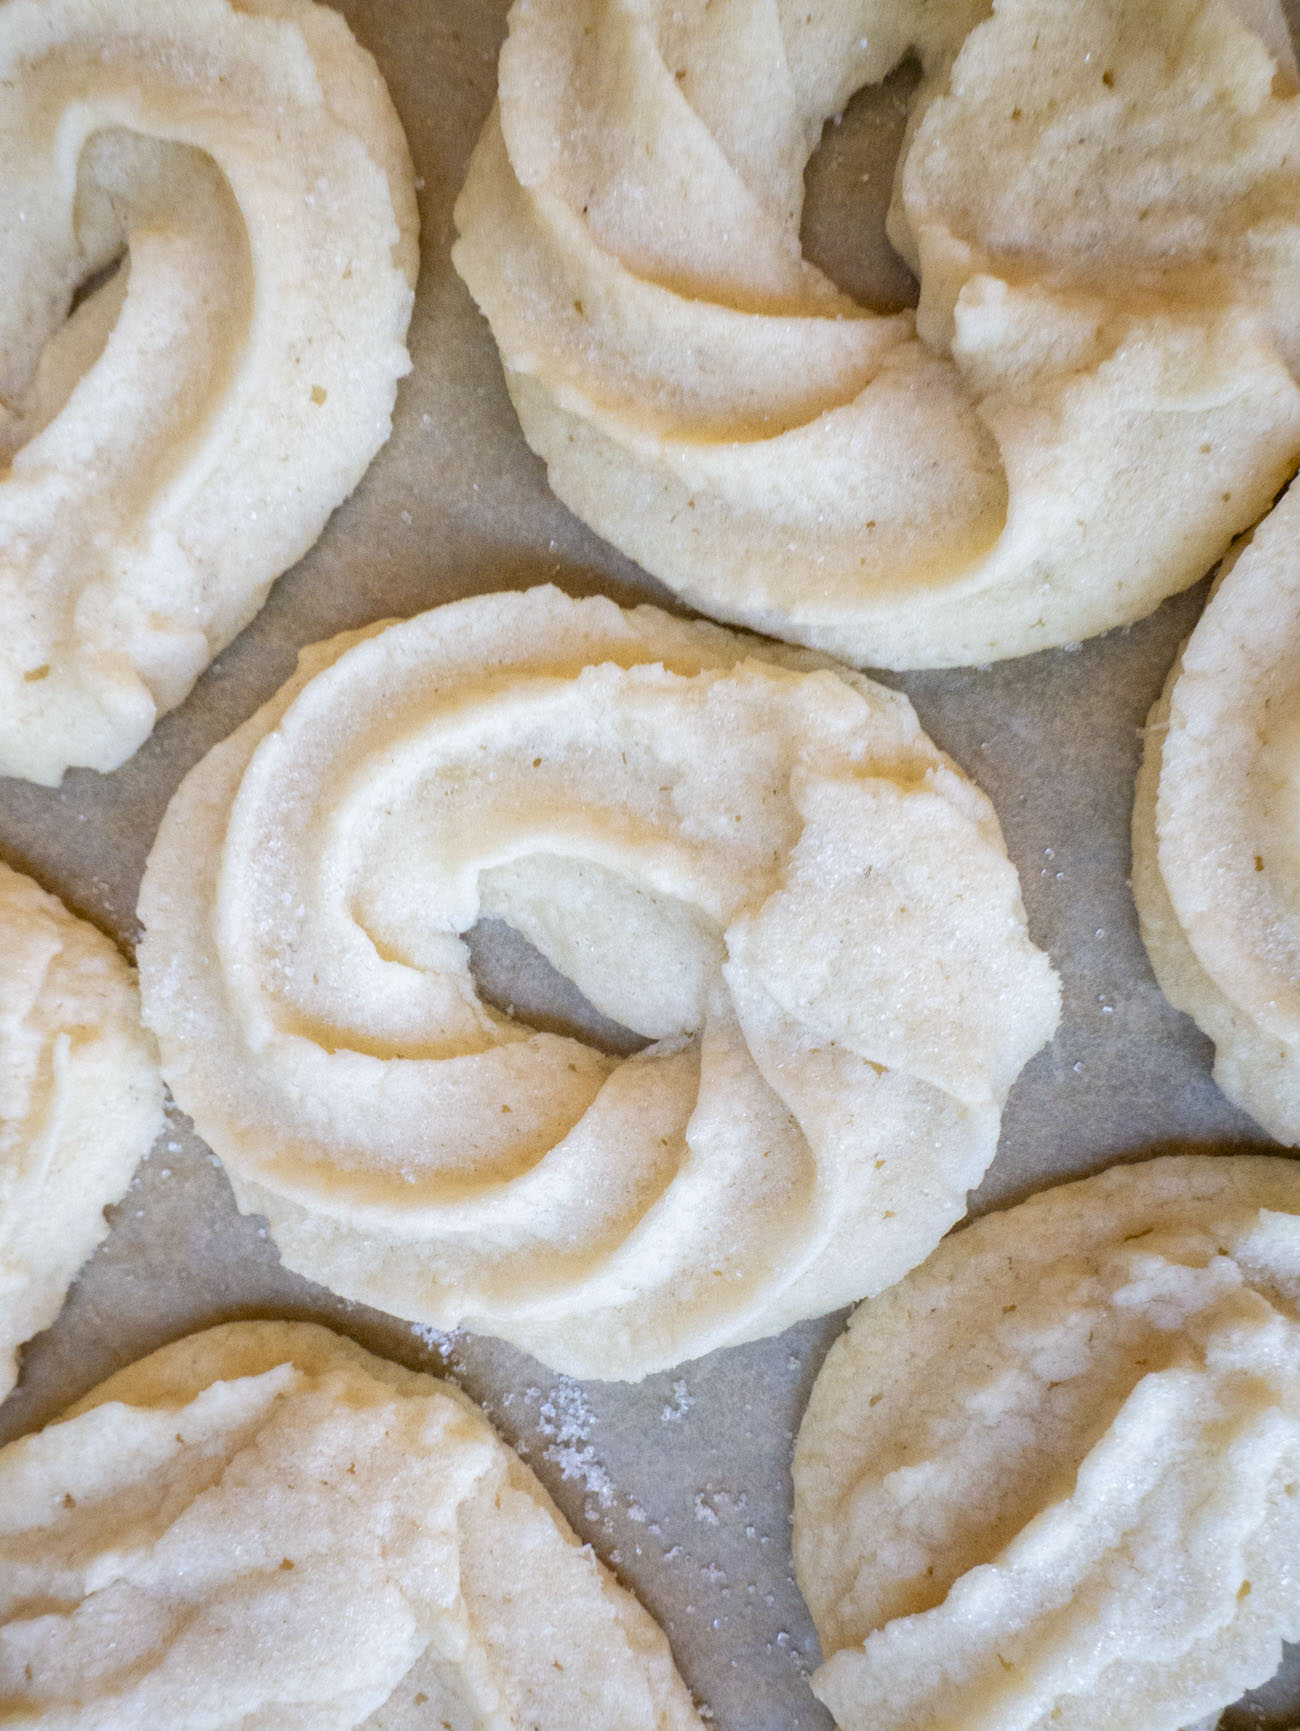 Danish Butter Cookies - The Salted Pepper